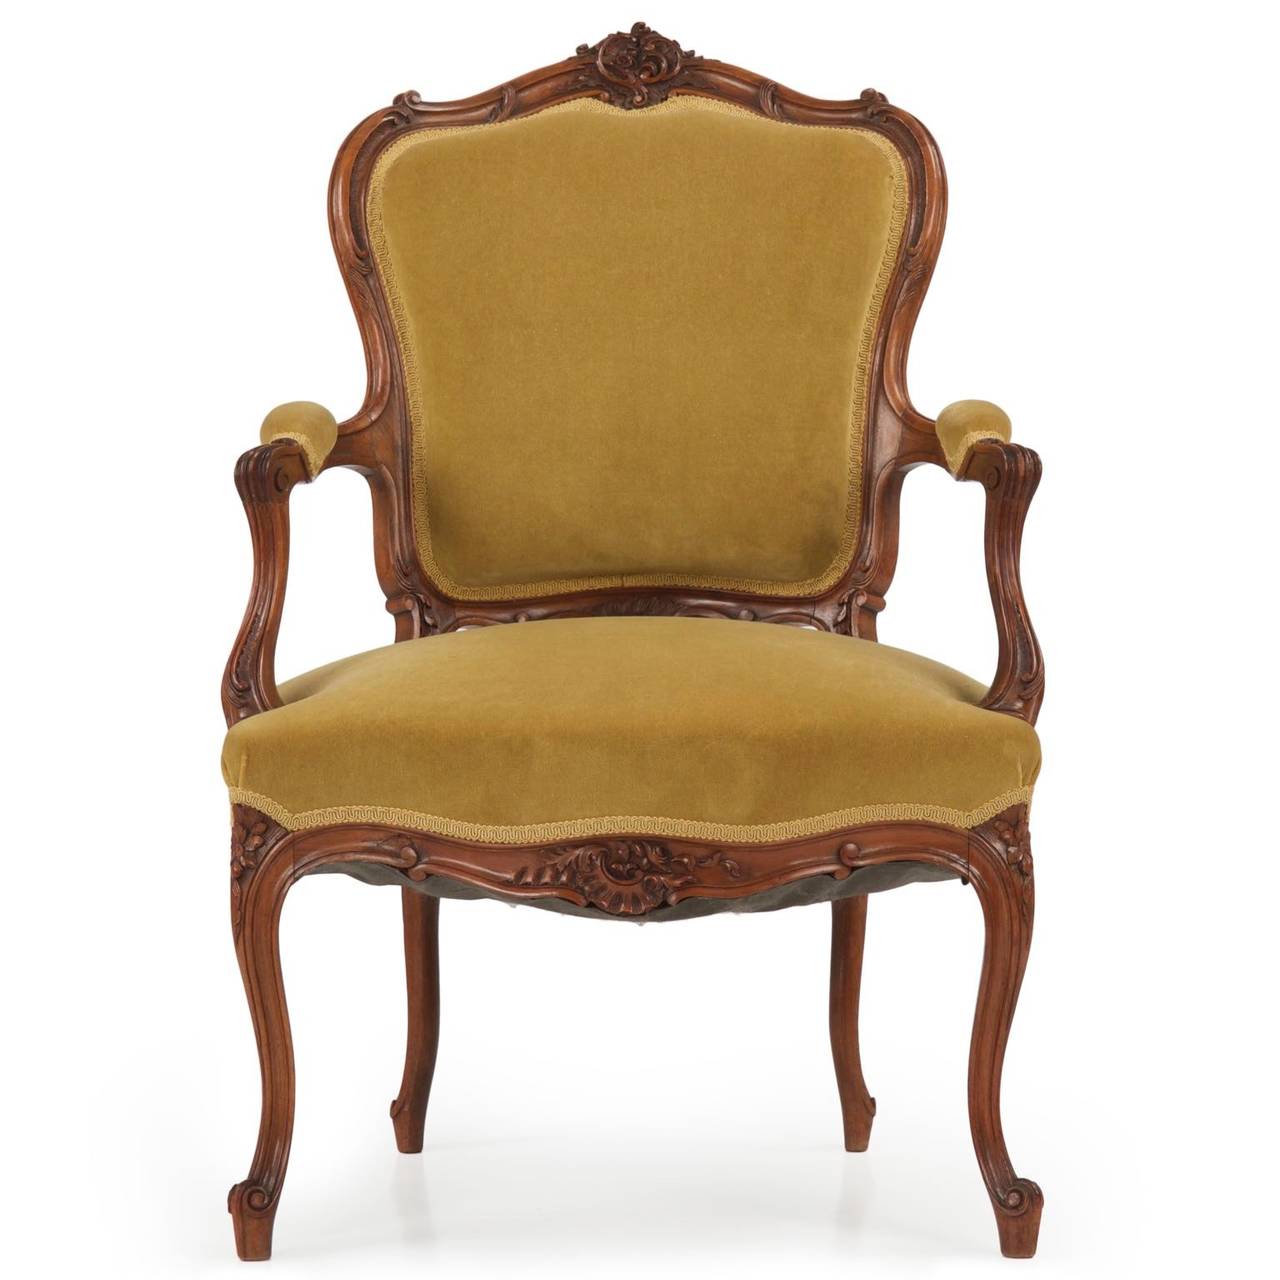 European Rococo Revival Walnut Parlor Suite with Settee and Four Chairs, 19th Century